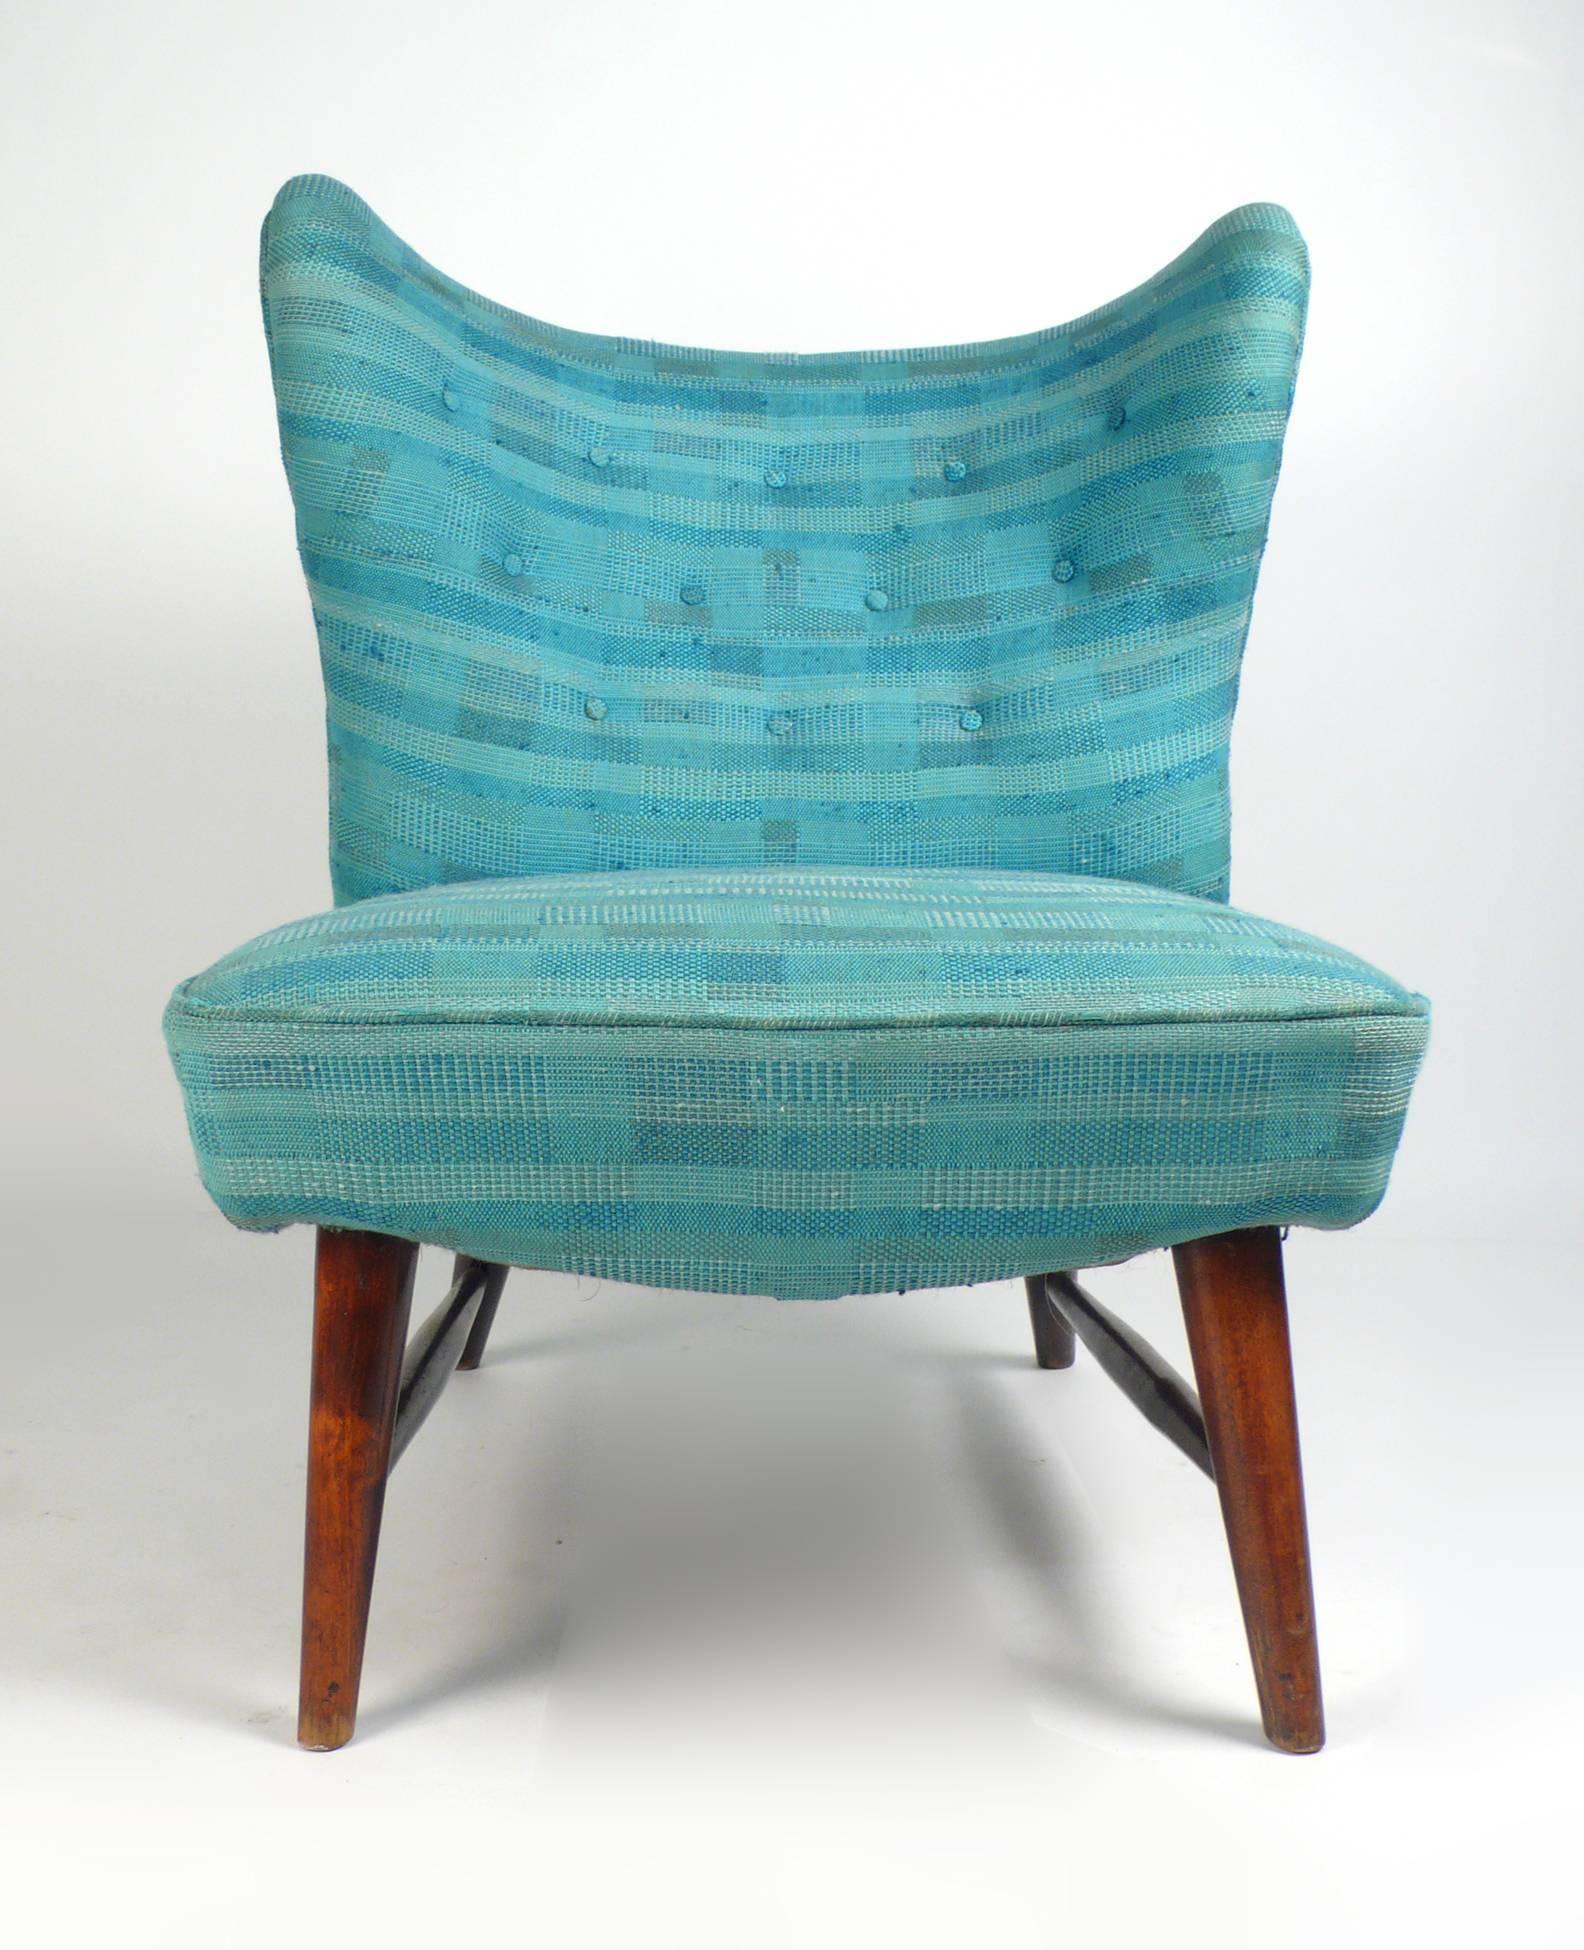 Rare and important, 201 armless chair by Elias Svedberg for Nordiska Kompaniet -1947 imported by Knoll International. The 201 armless chair was made 1947- 1951 in Sweden and is in very good condition with the original upholstery. New upholstery